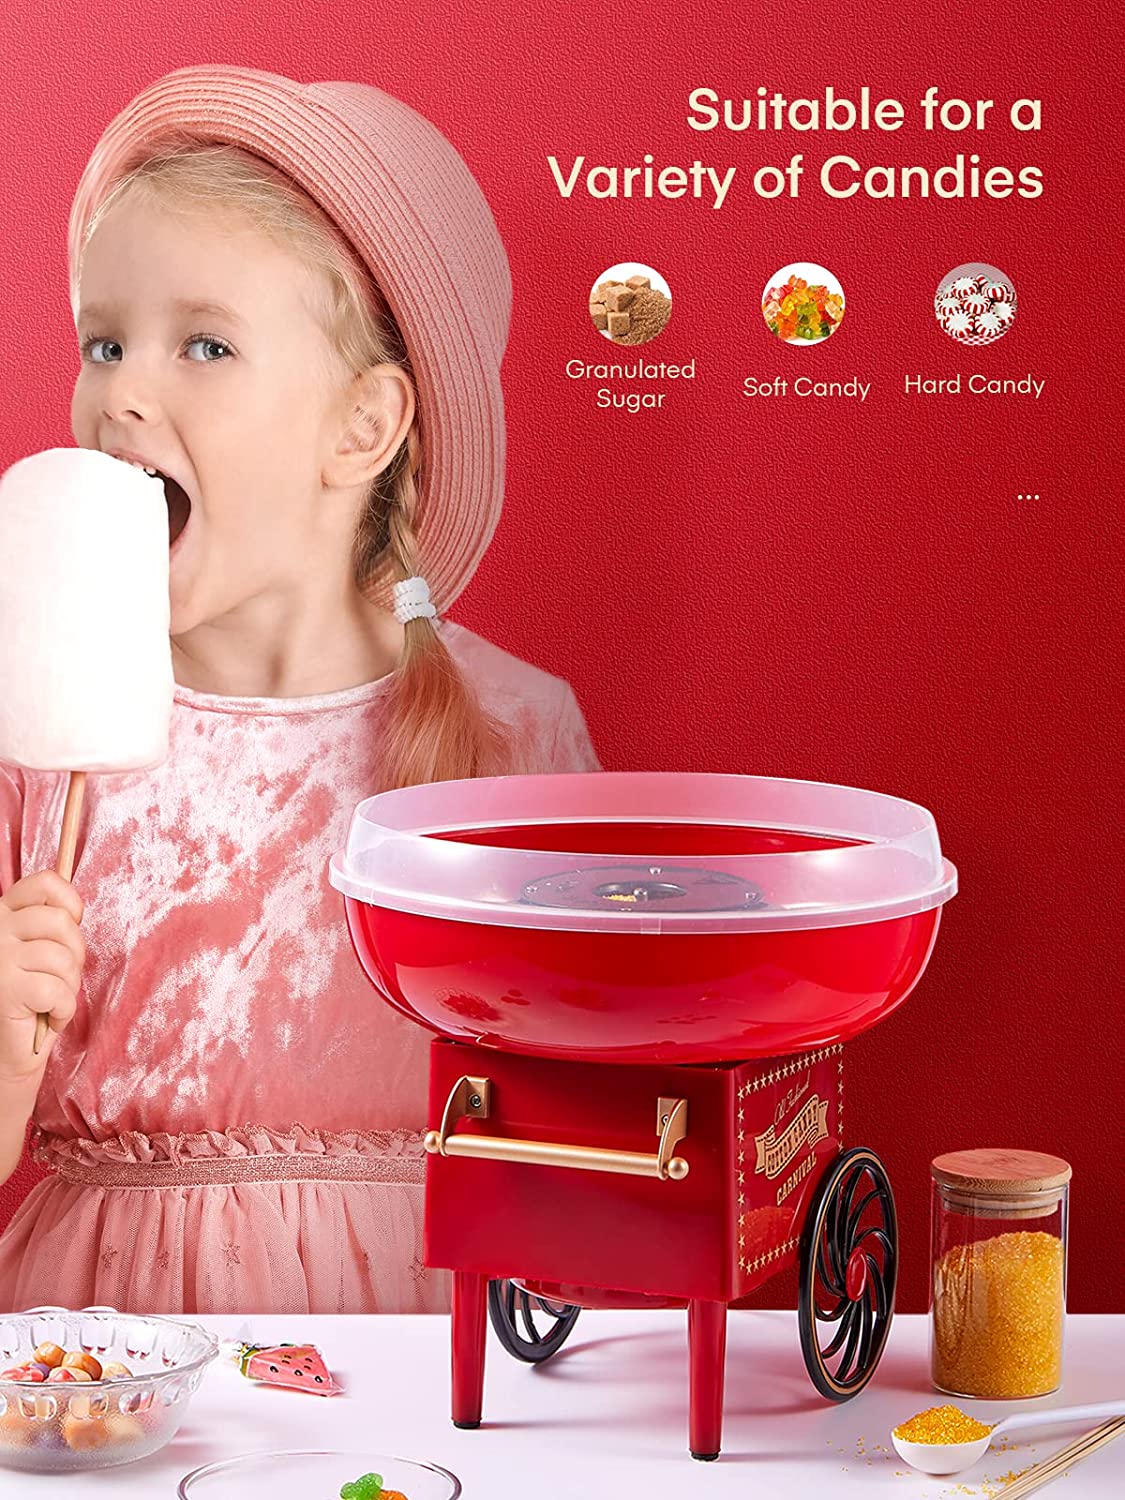 suitable for a variety of candies, FOHERE Cotton Candy Machine for Kids, Nostalgia Cotton Candy Maker Include Sugar Scoop and 10 Cones, Homemade Sweets for Birthday Parties, Children's Day, Christmas Day and Wedding